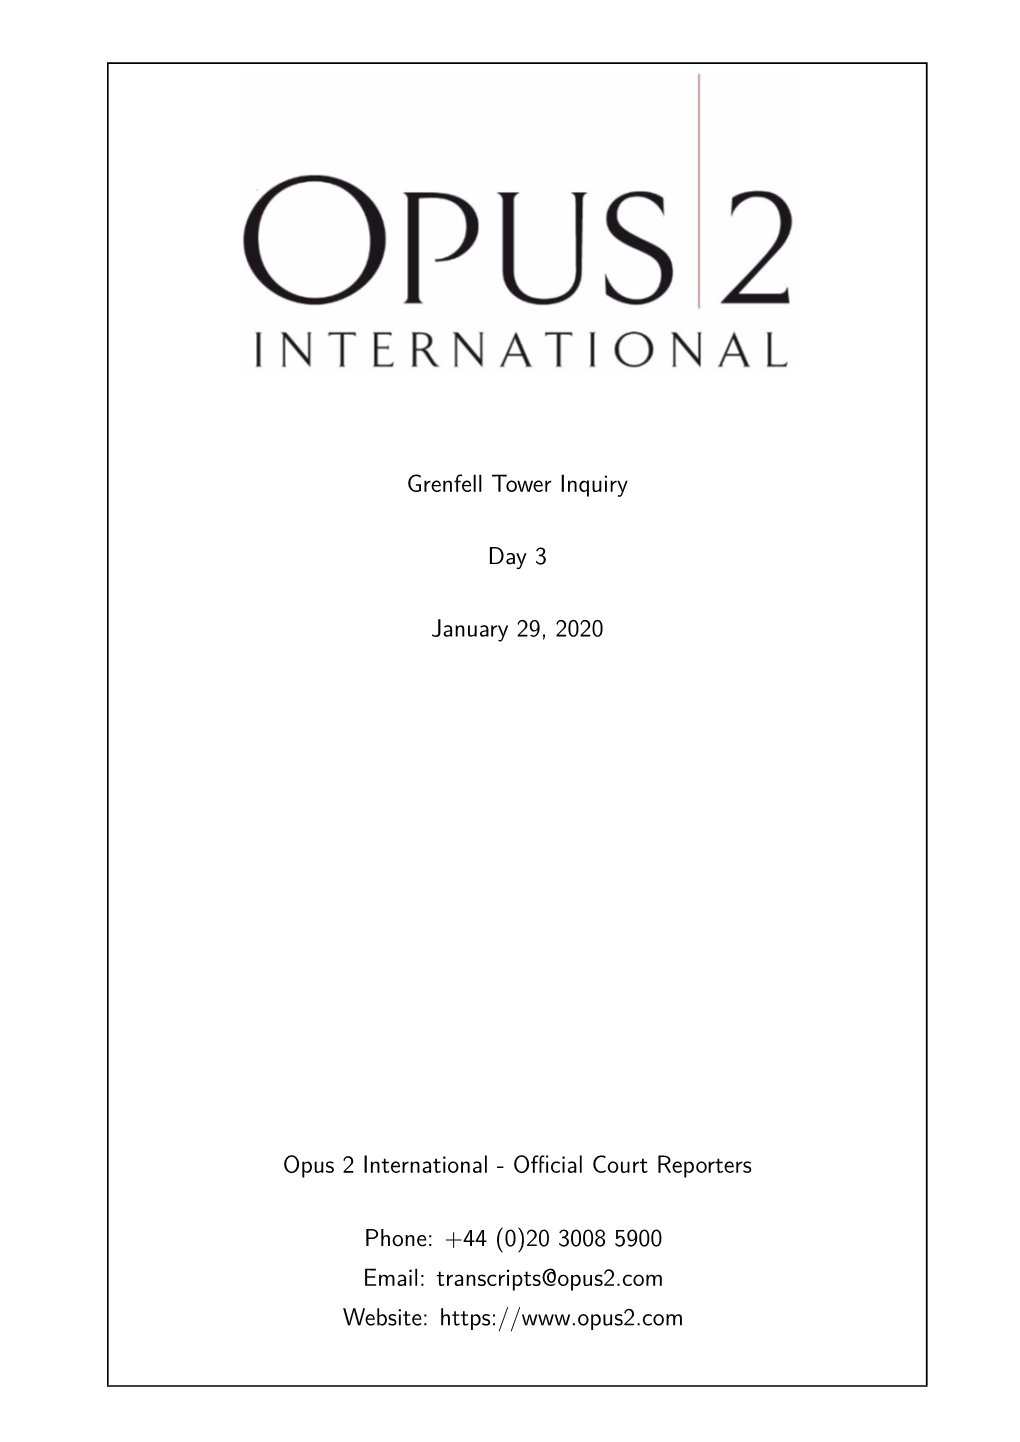 Grenfell Tower Inquiry Day 3 January 29, 2020 Opus 2 International